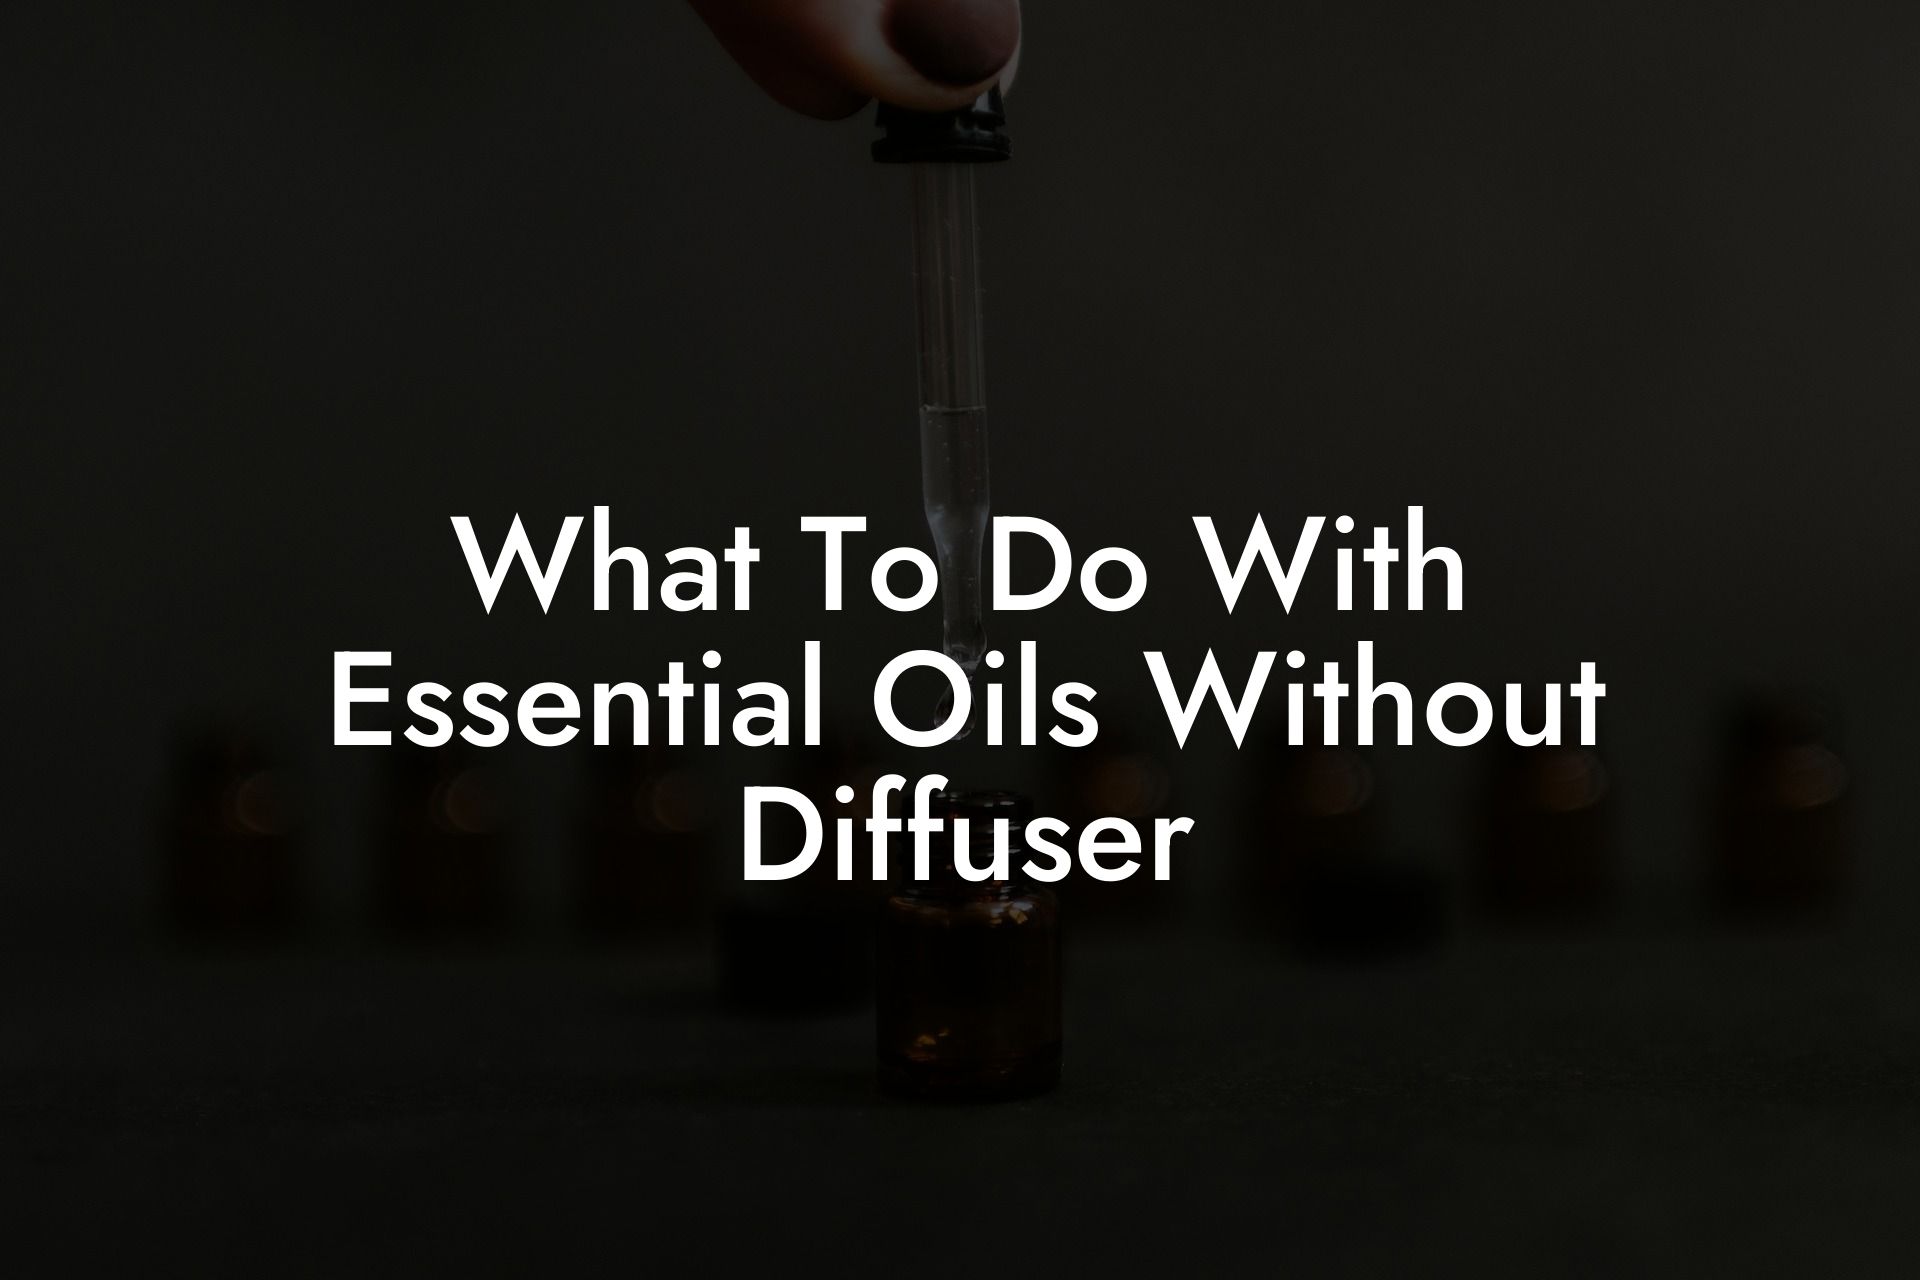 What To Do With Essential Oils Without Diffuser